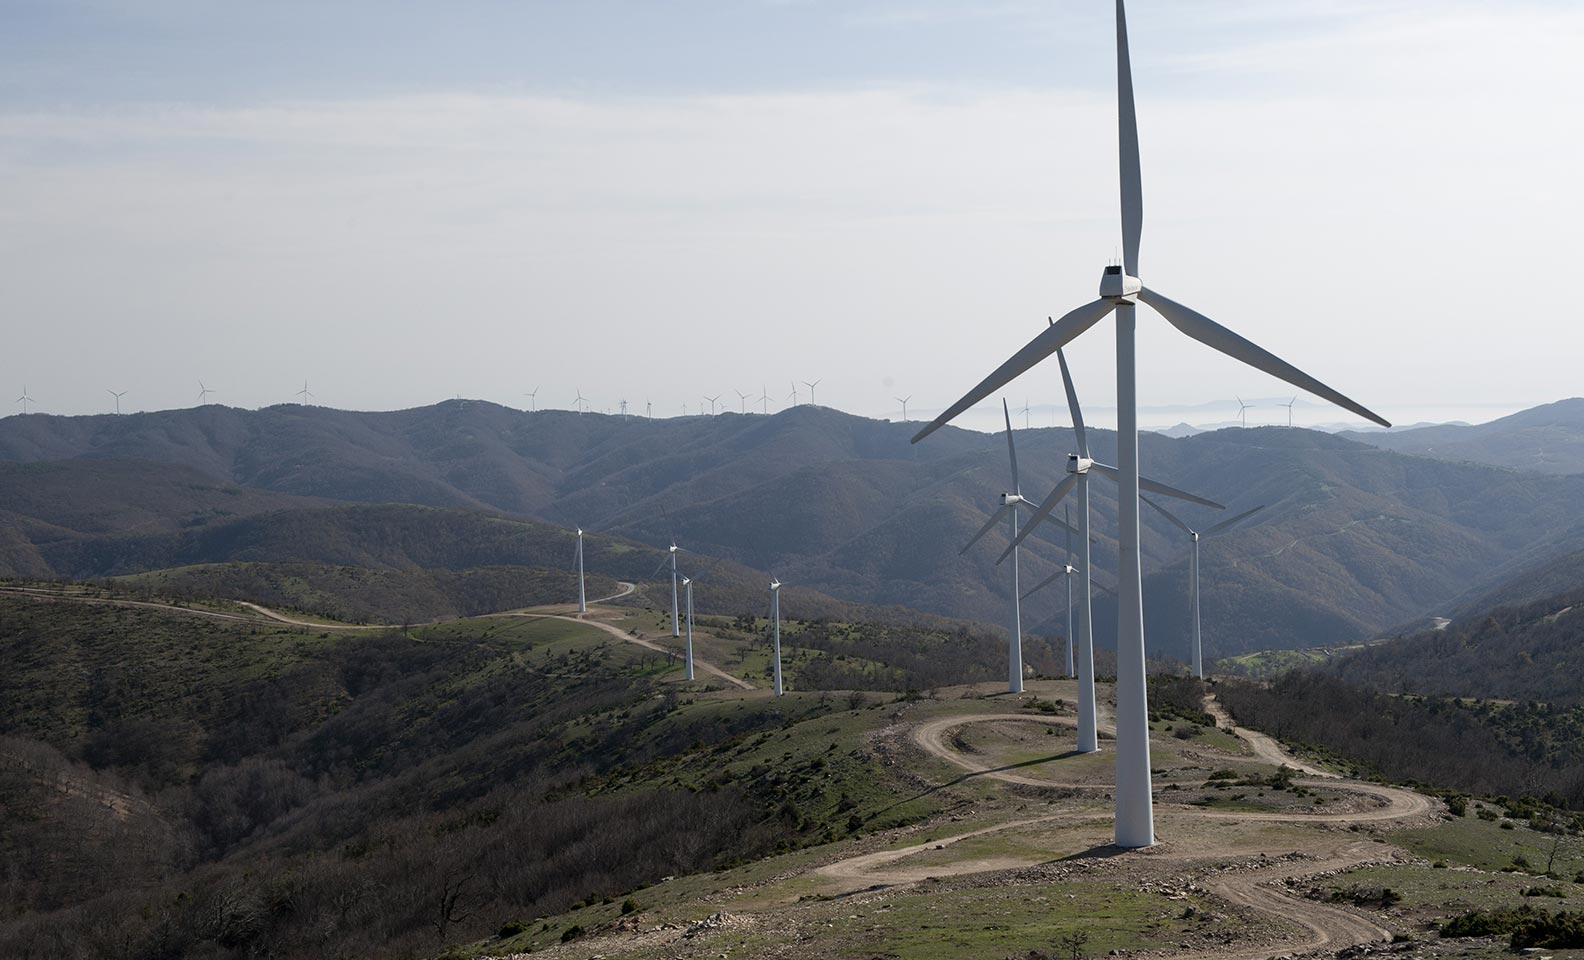 Series of wind turbine in the mountains